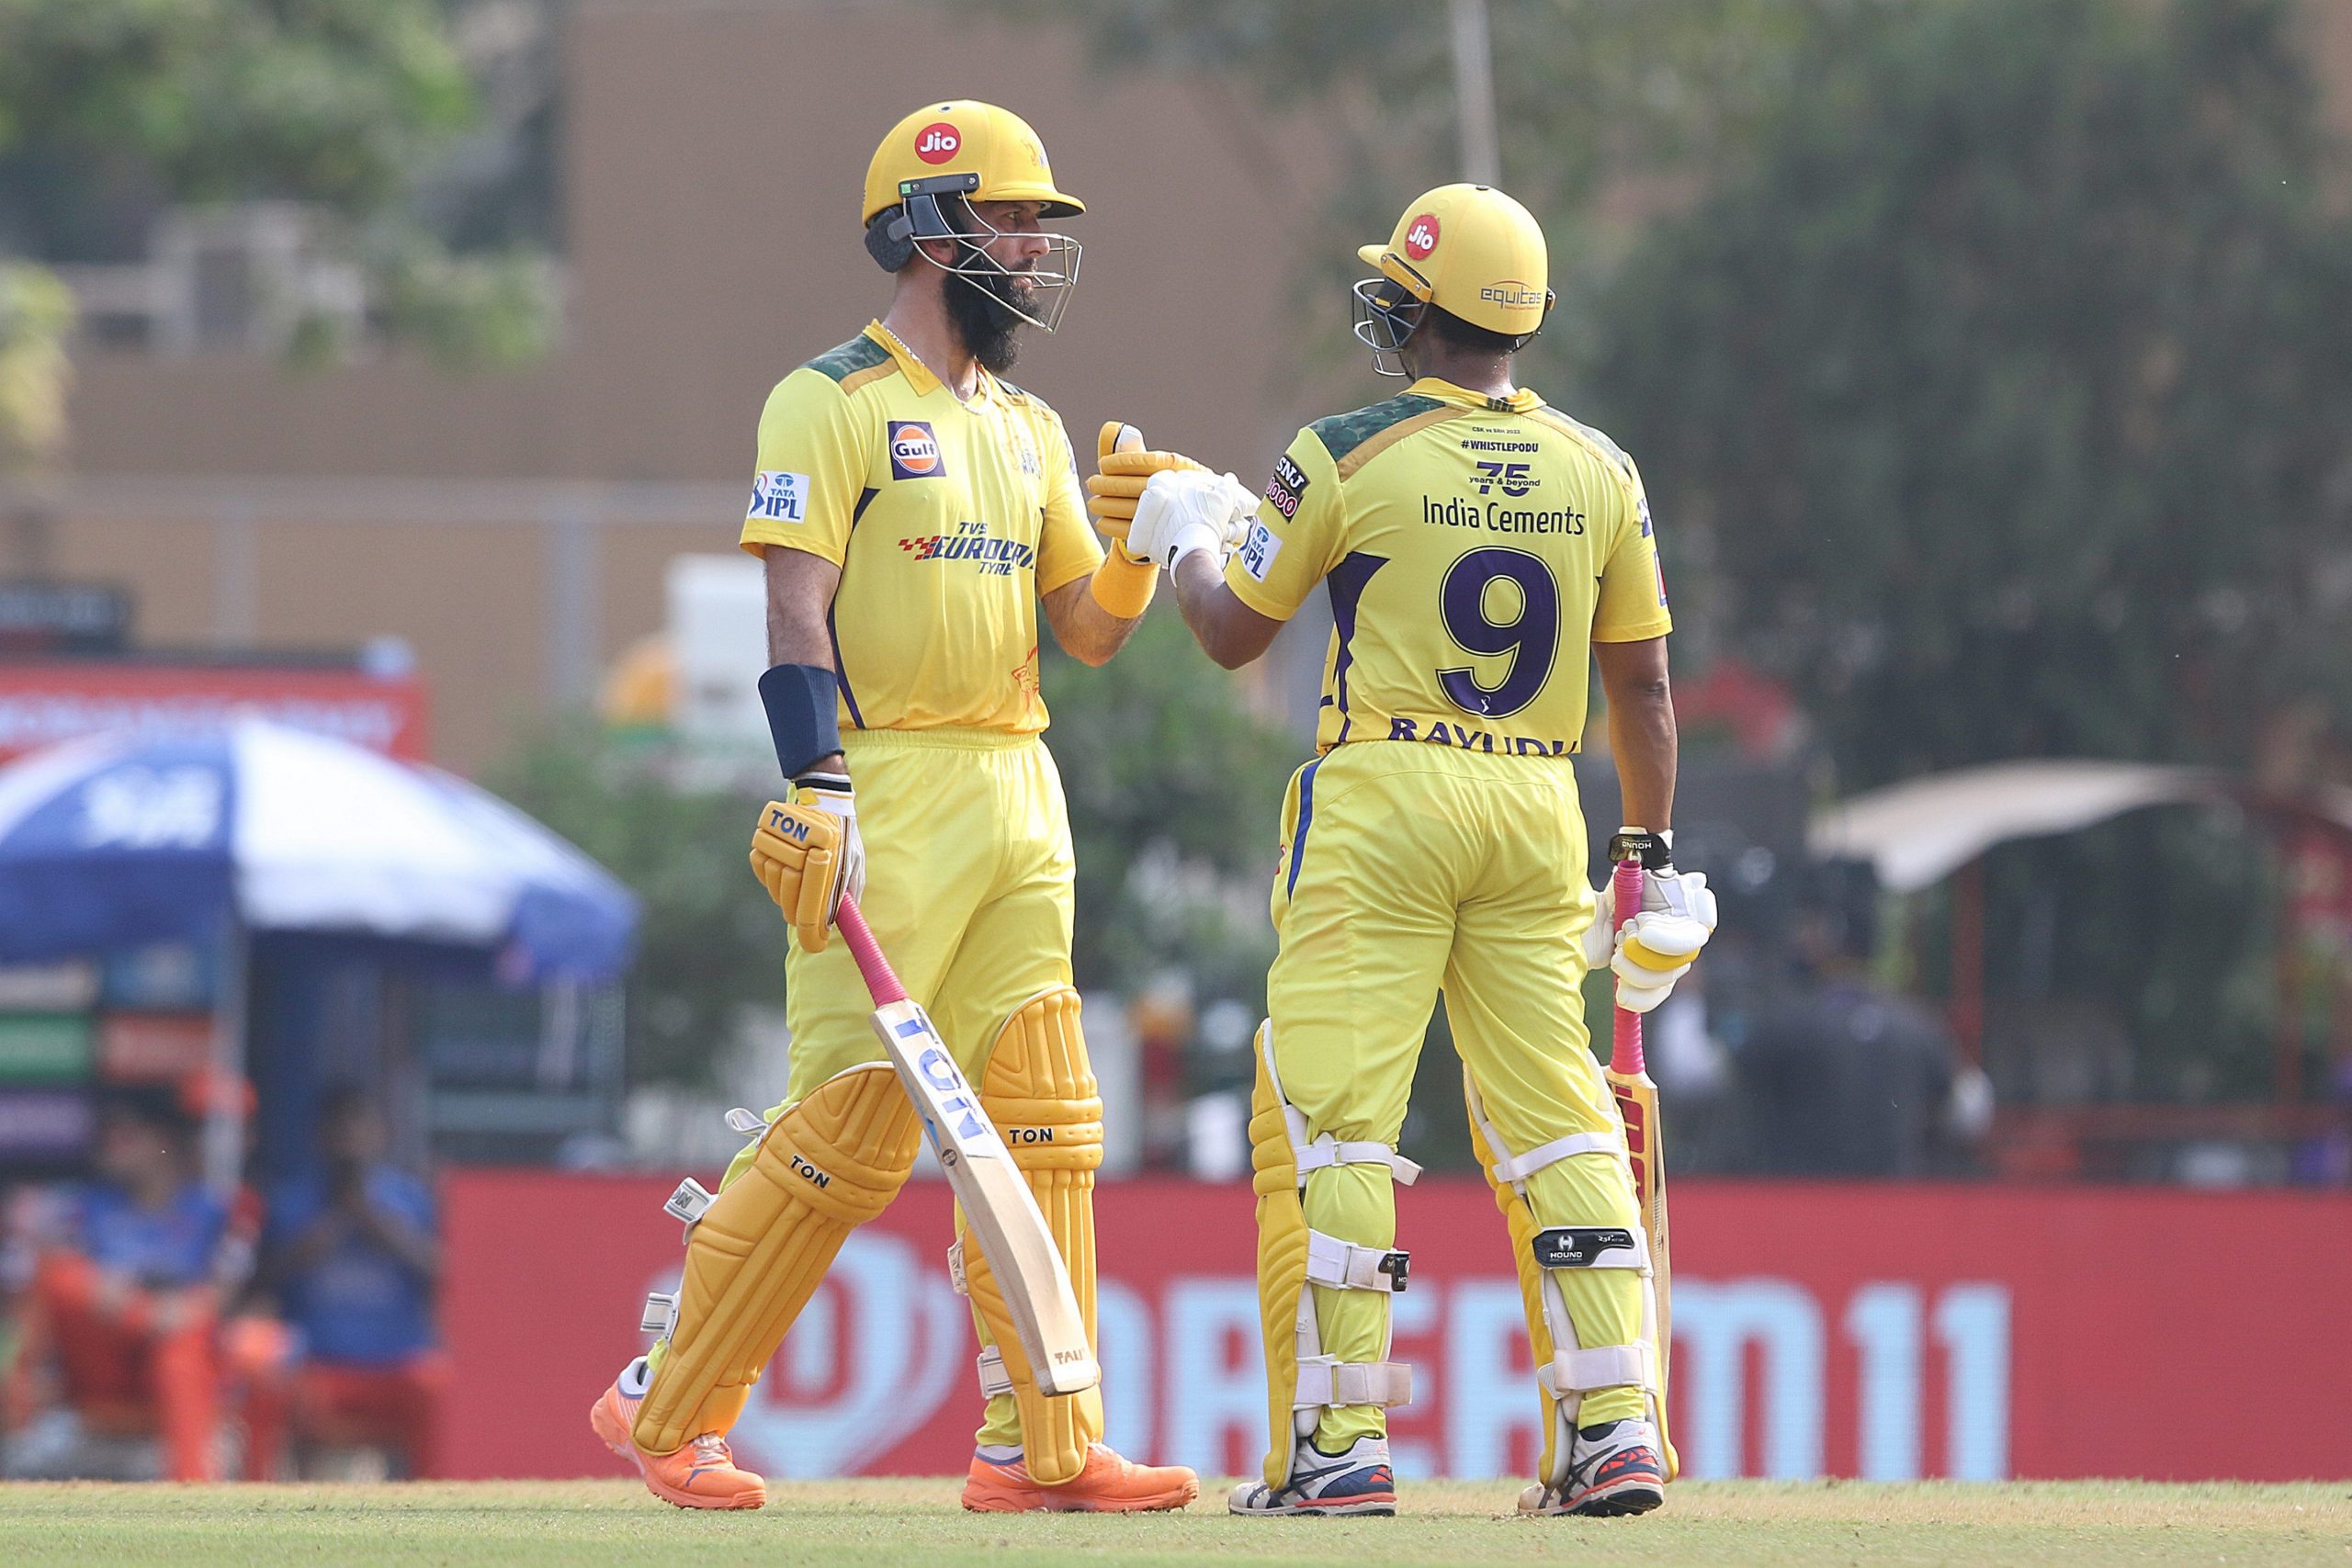 IPL 2022: When and where to watch CSK vs RCB, live streaming?